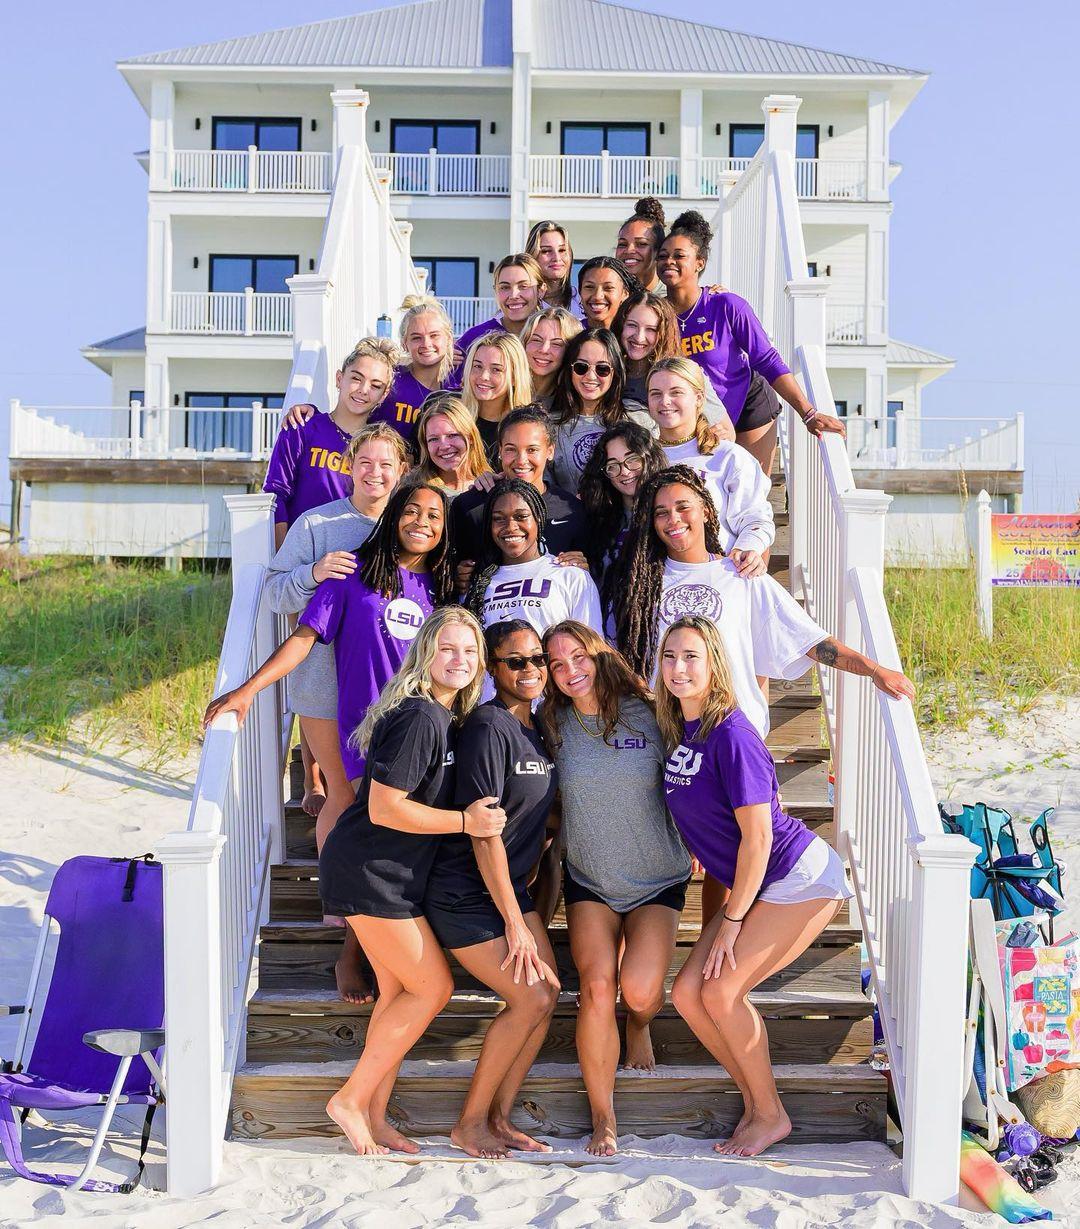 Olivia Dunne posing with her LSU Tigers teammates at the beach.